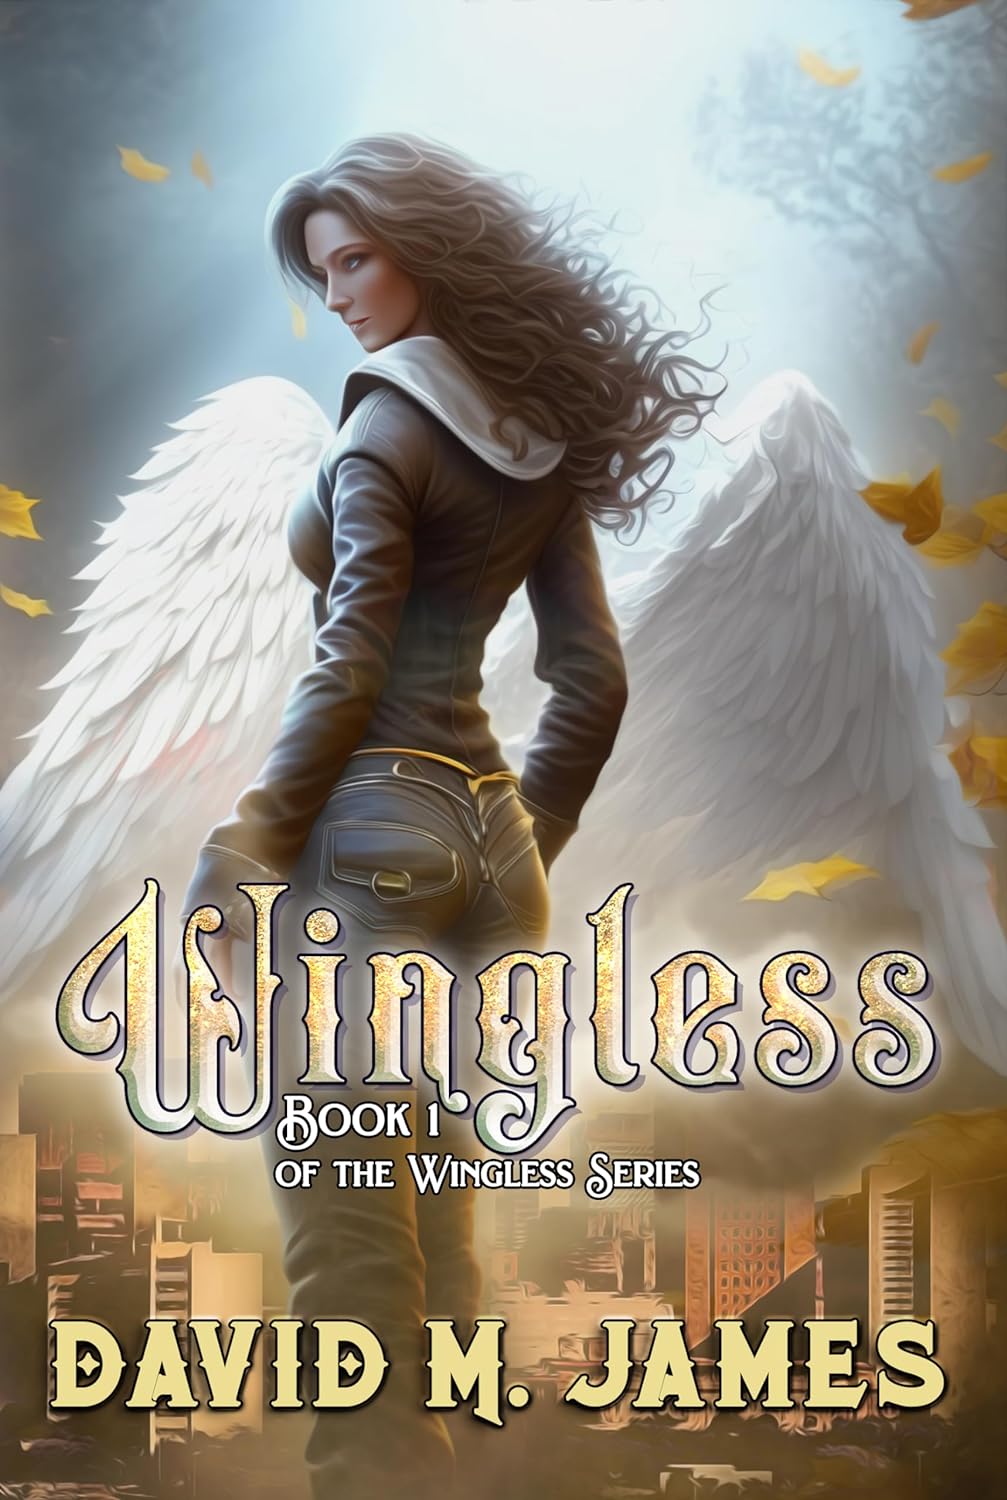 Catching Up on New Urban Fantasy Releases